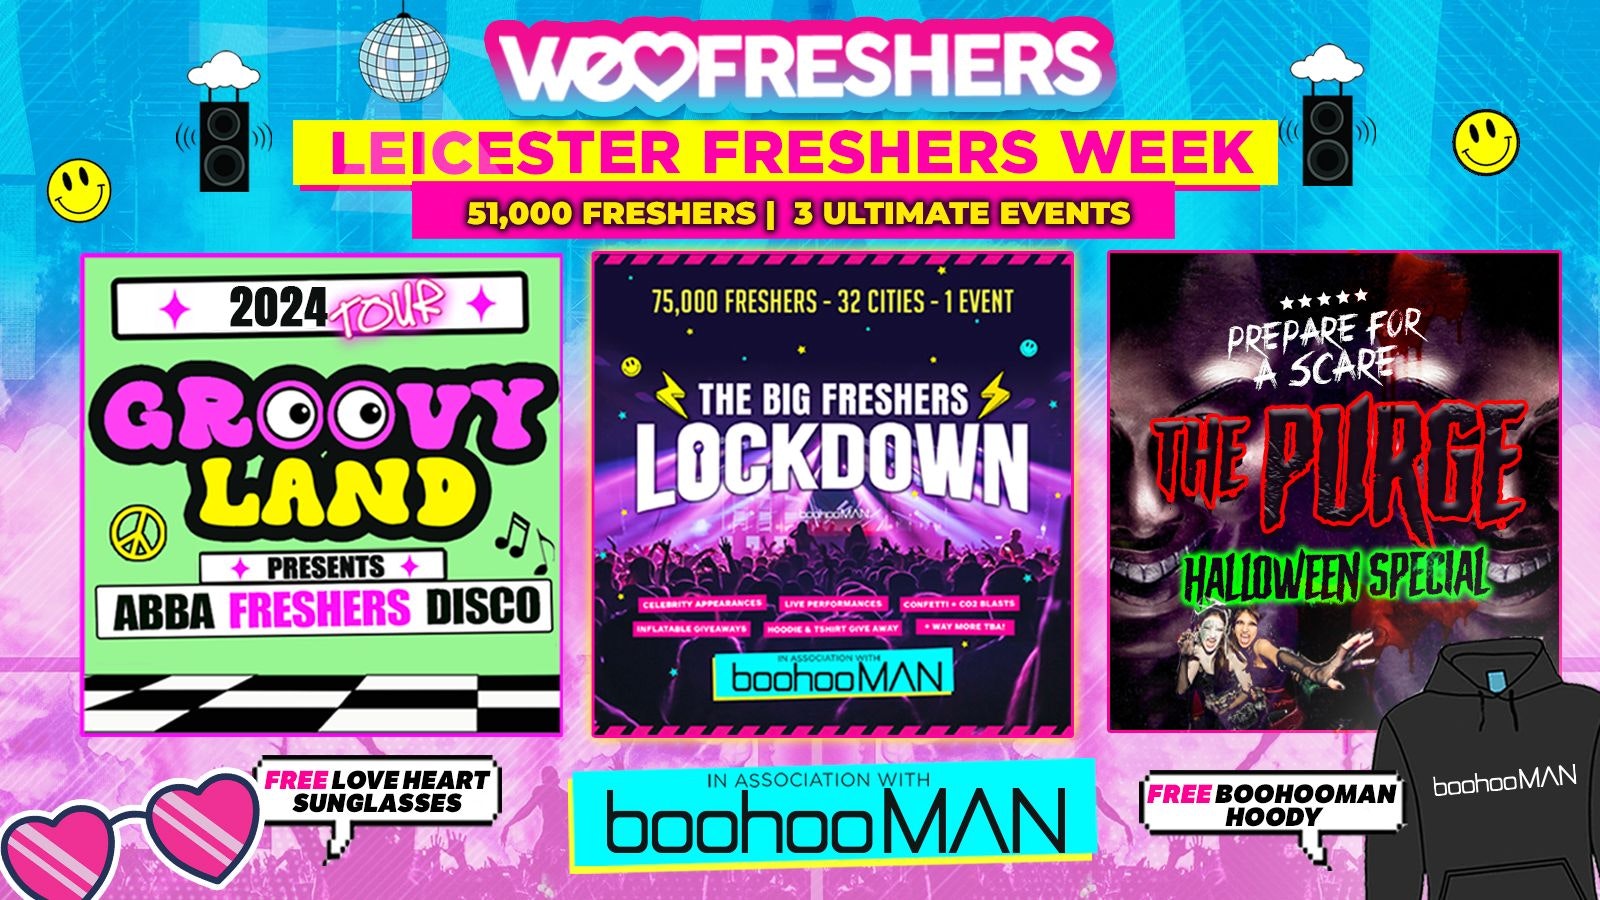 WE LOVE LEICESTER FRESHERS 2024 in association with boohooMAN – 3 EVENTS❗